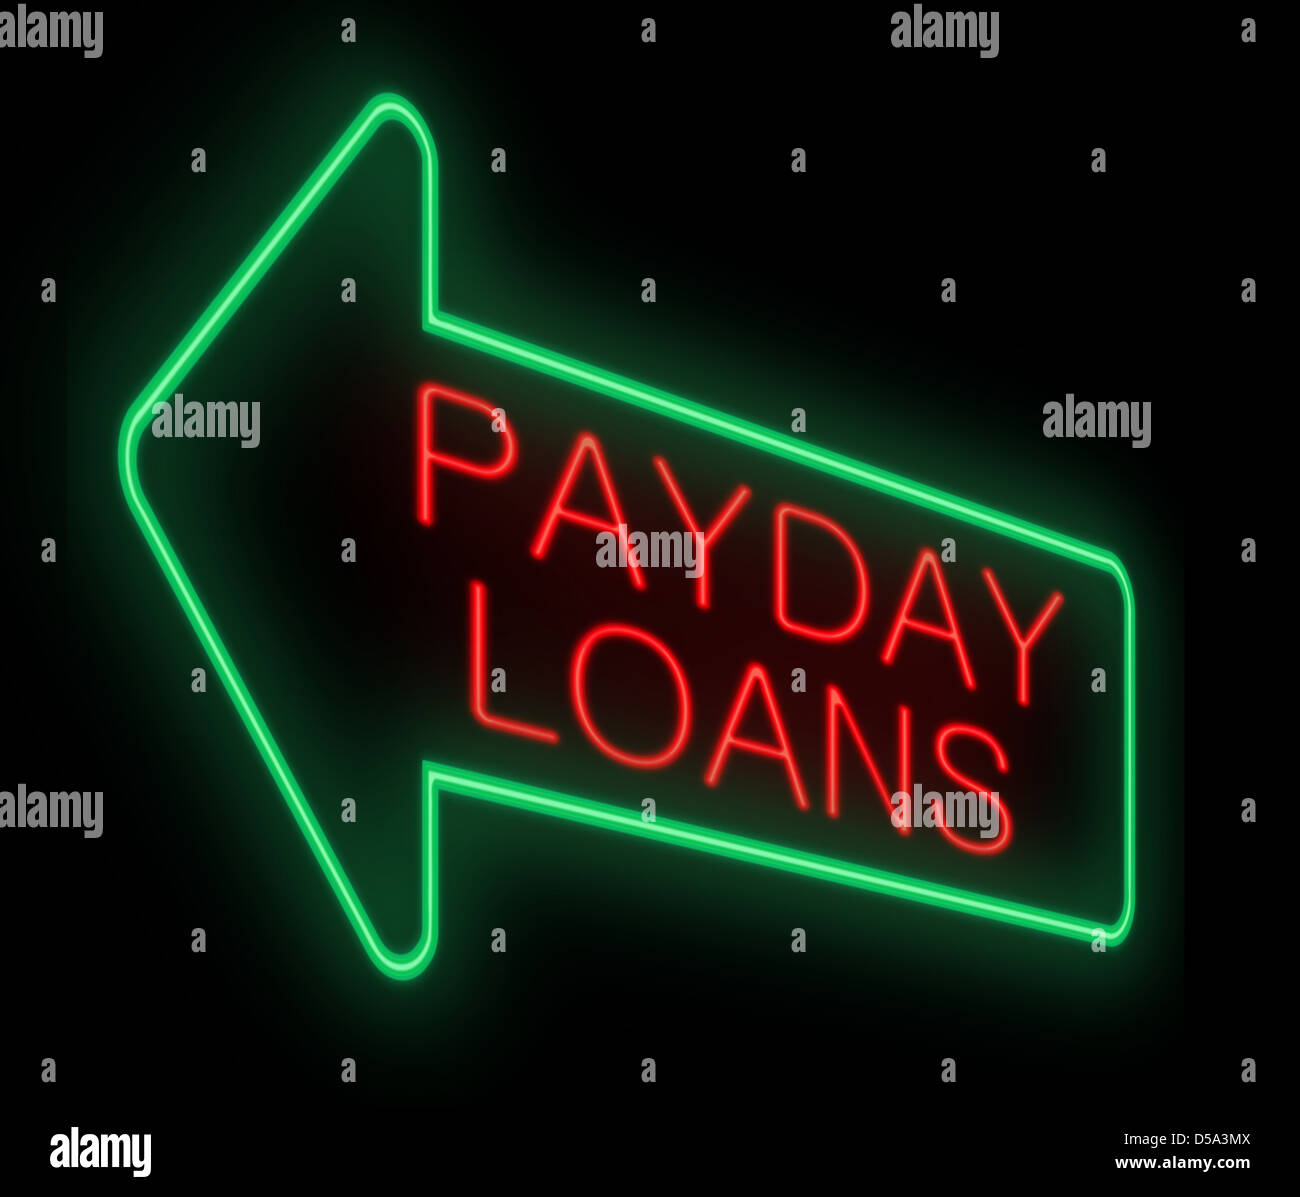 Payday Loan concetto. Foto Stock